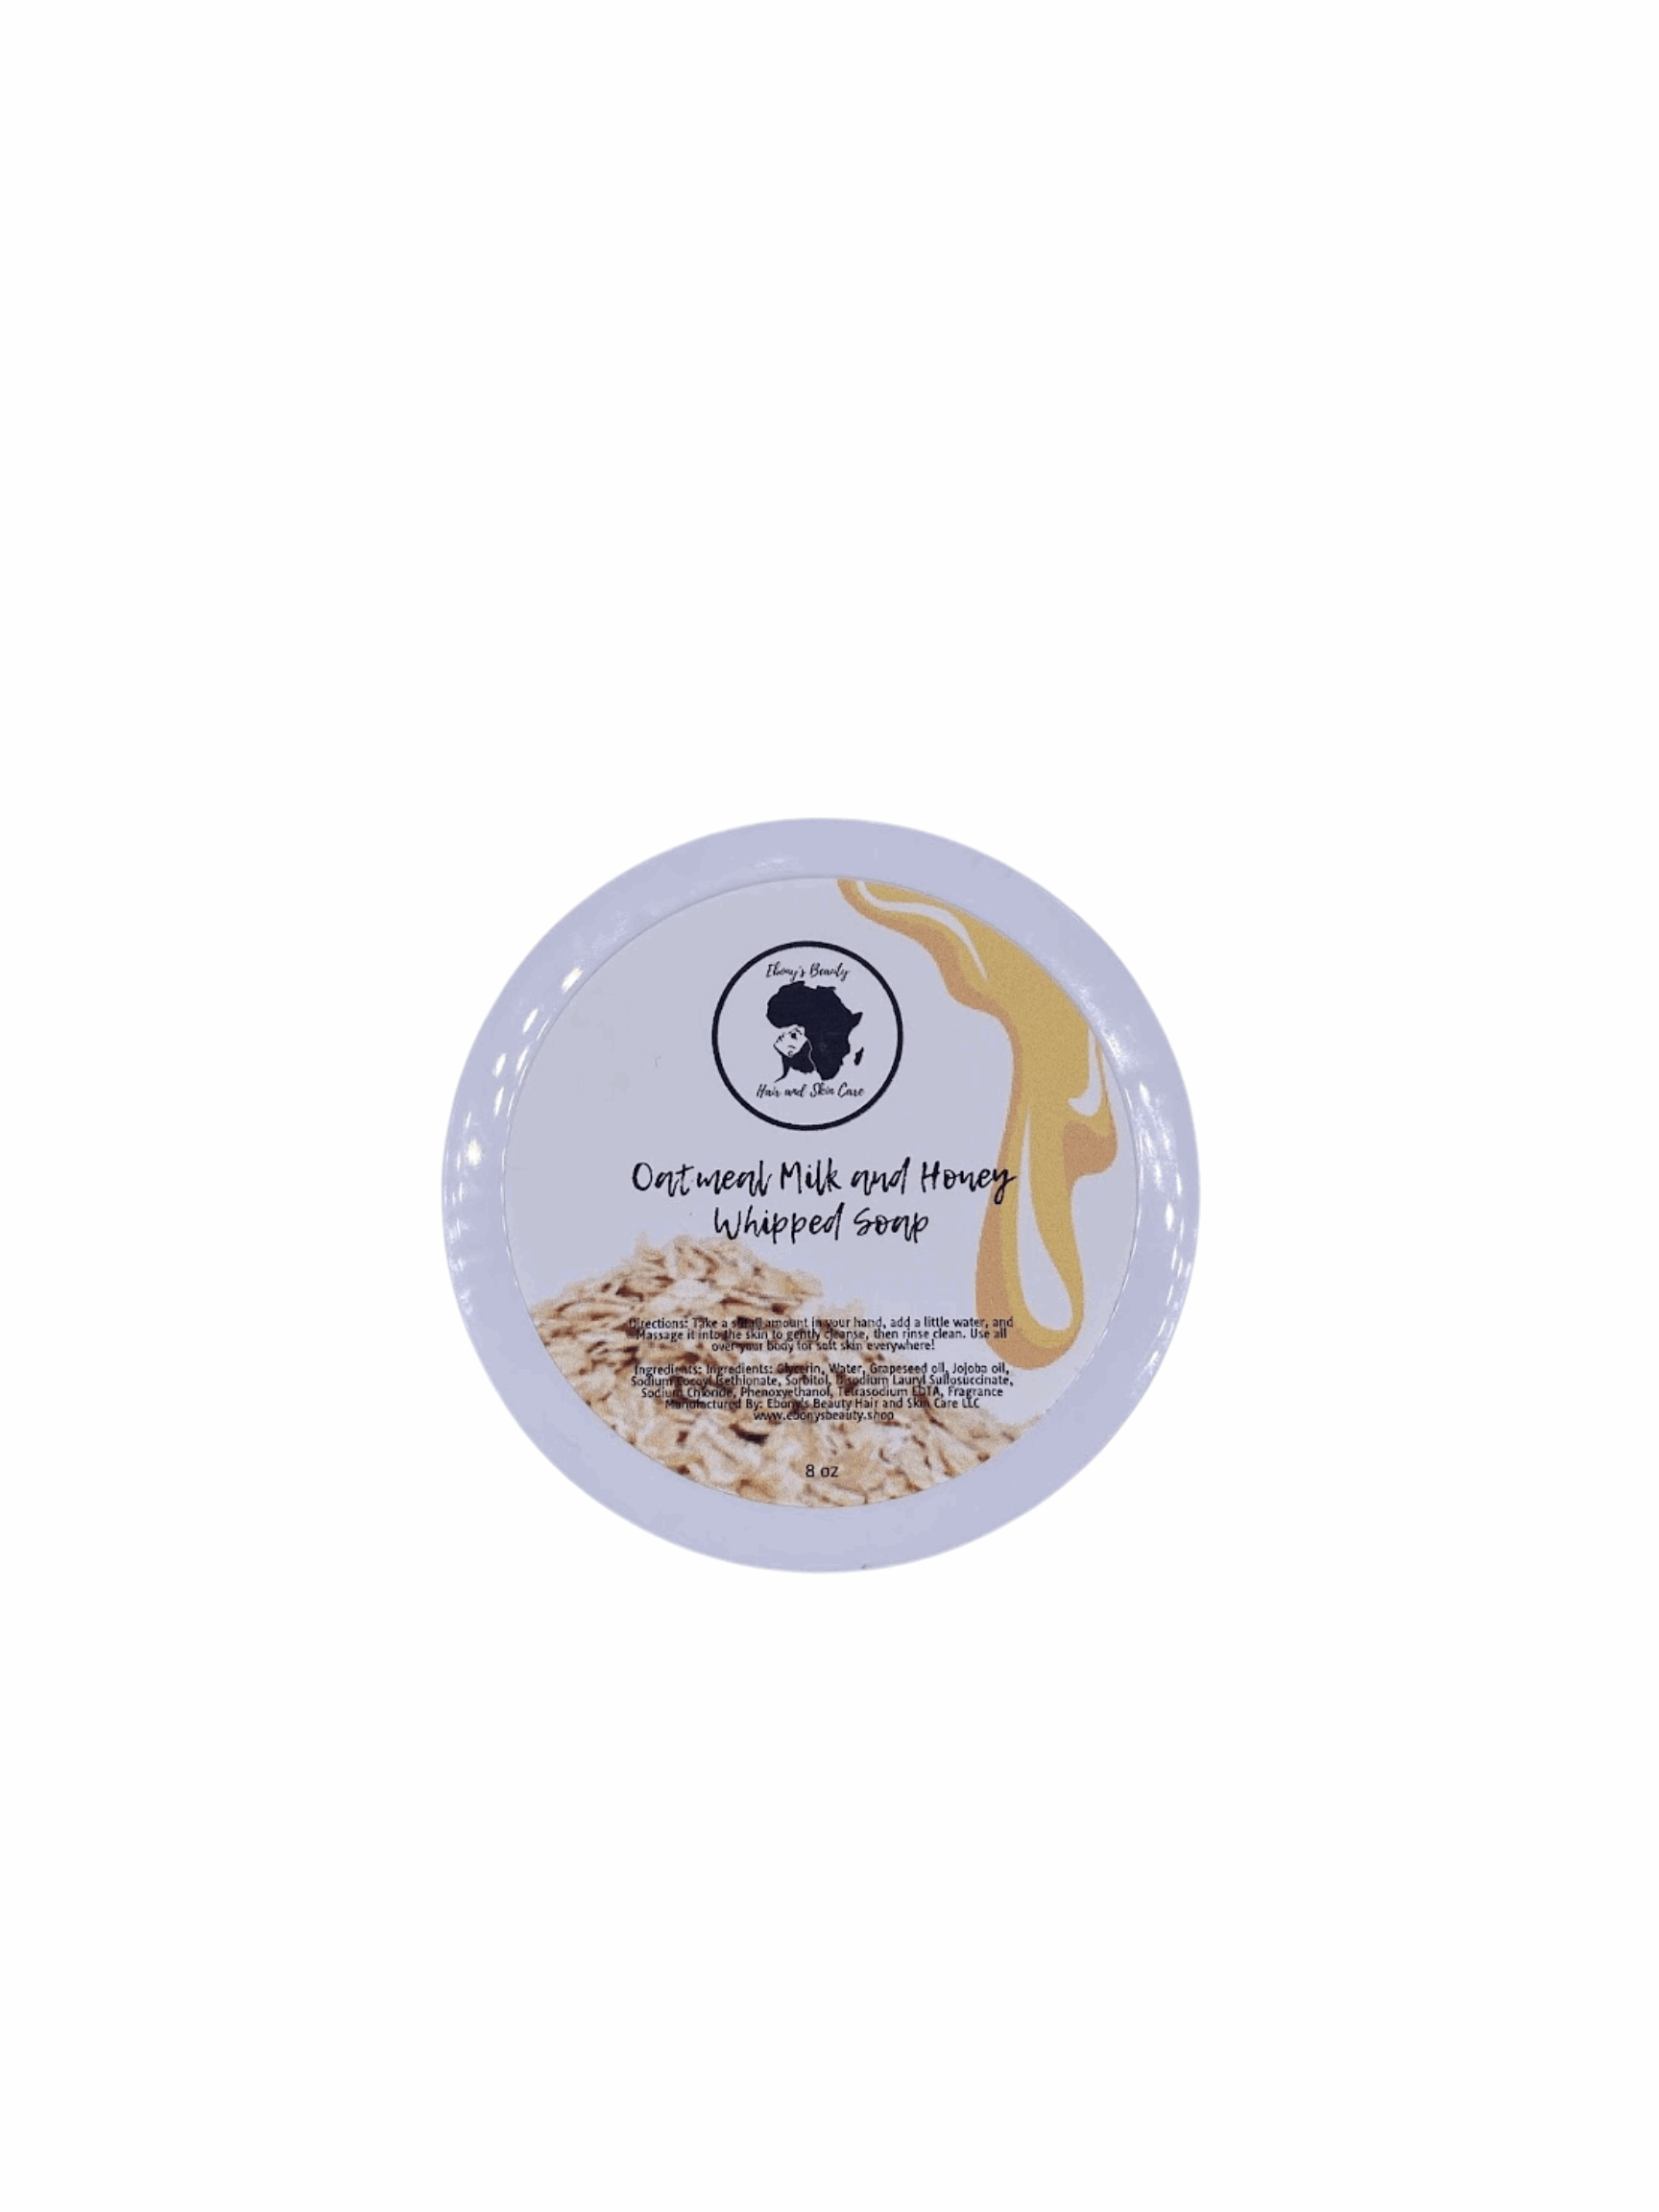 OATMEAL MILK AND HONEY WHIPPED SOAP